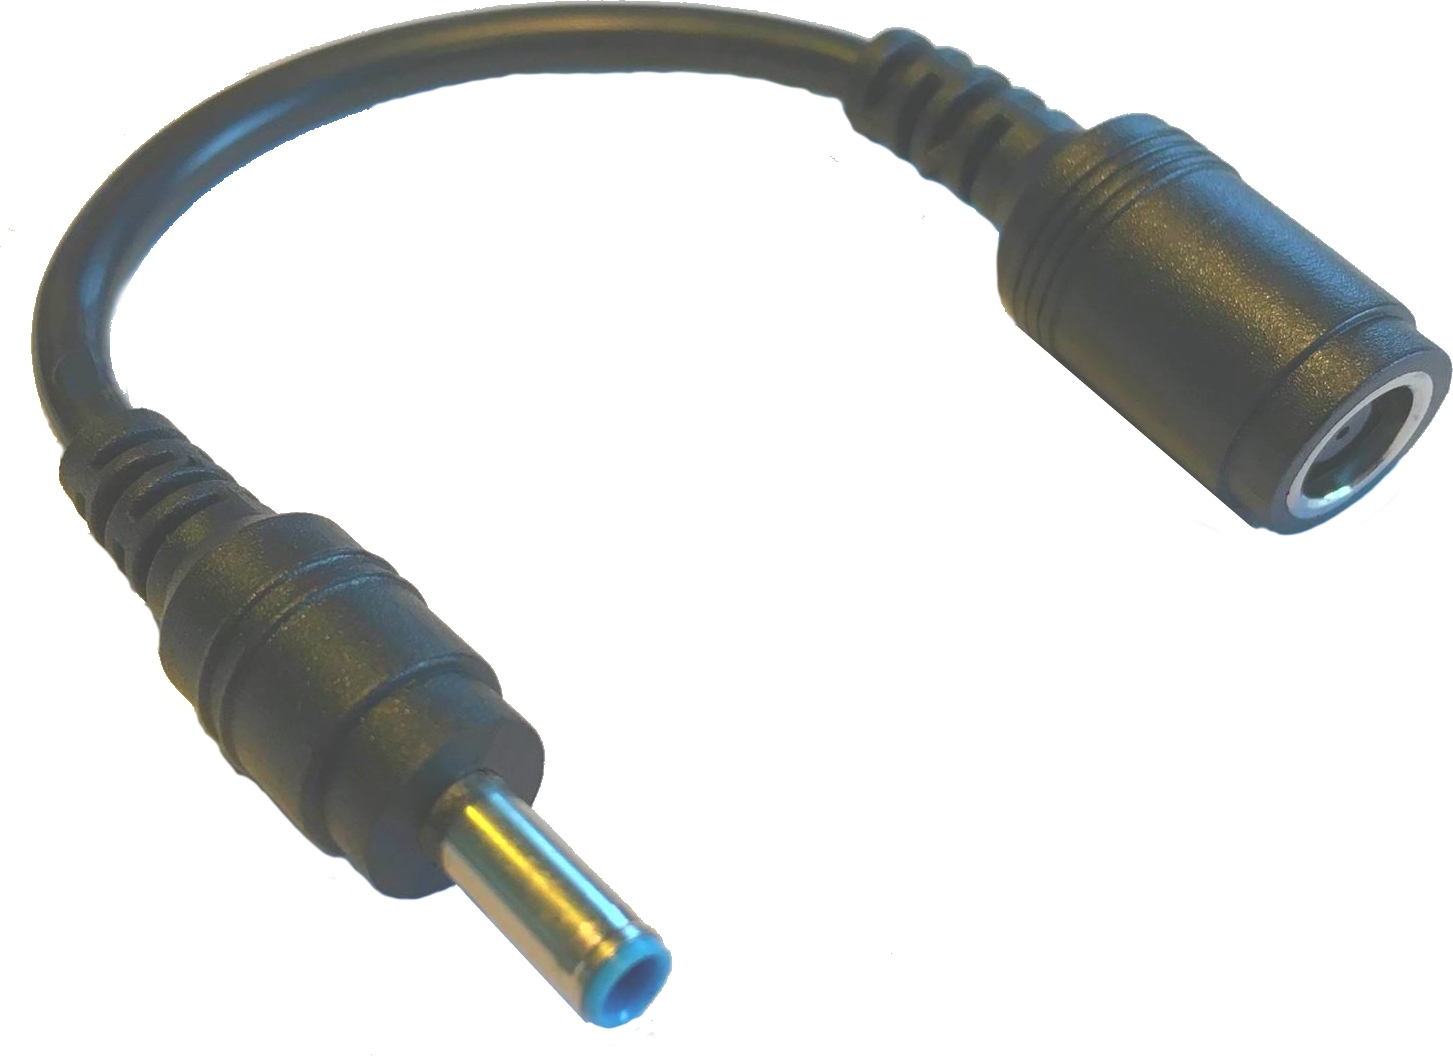 MicroBattery CoreParts Conversion Cable - Adapter für Power Connector - GS-Stecker 7,4 mm (W)